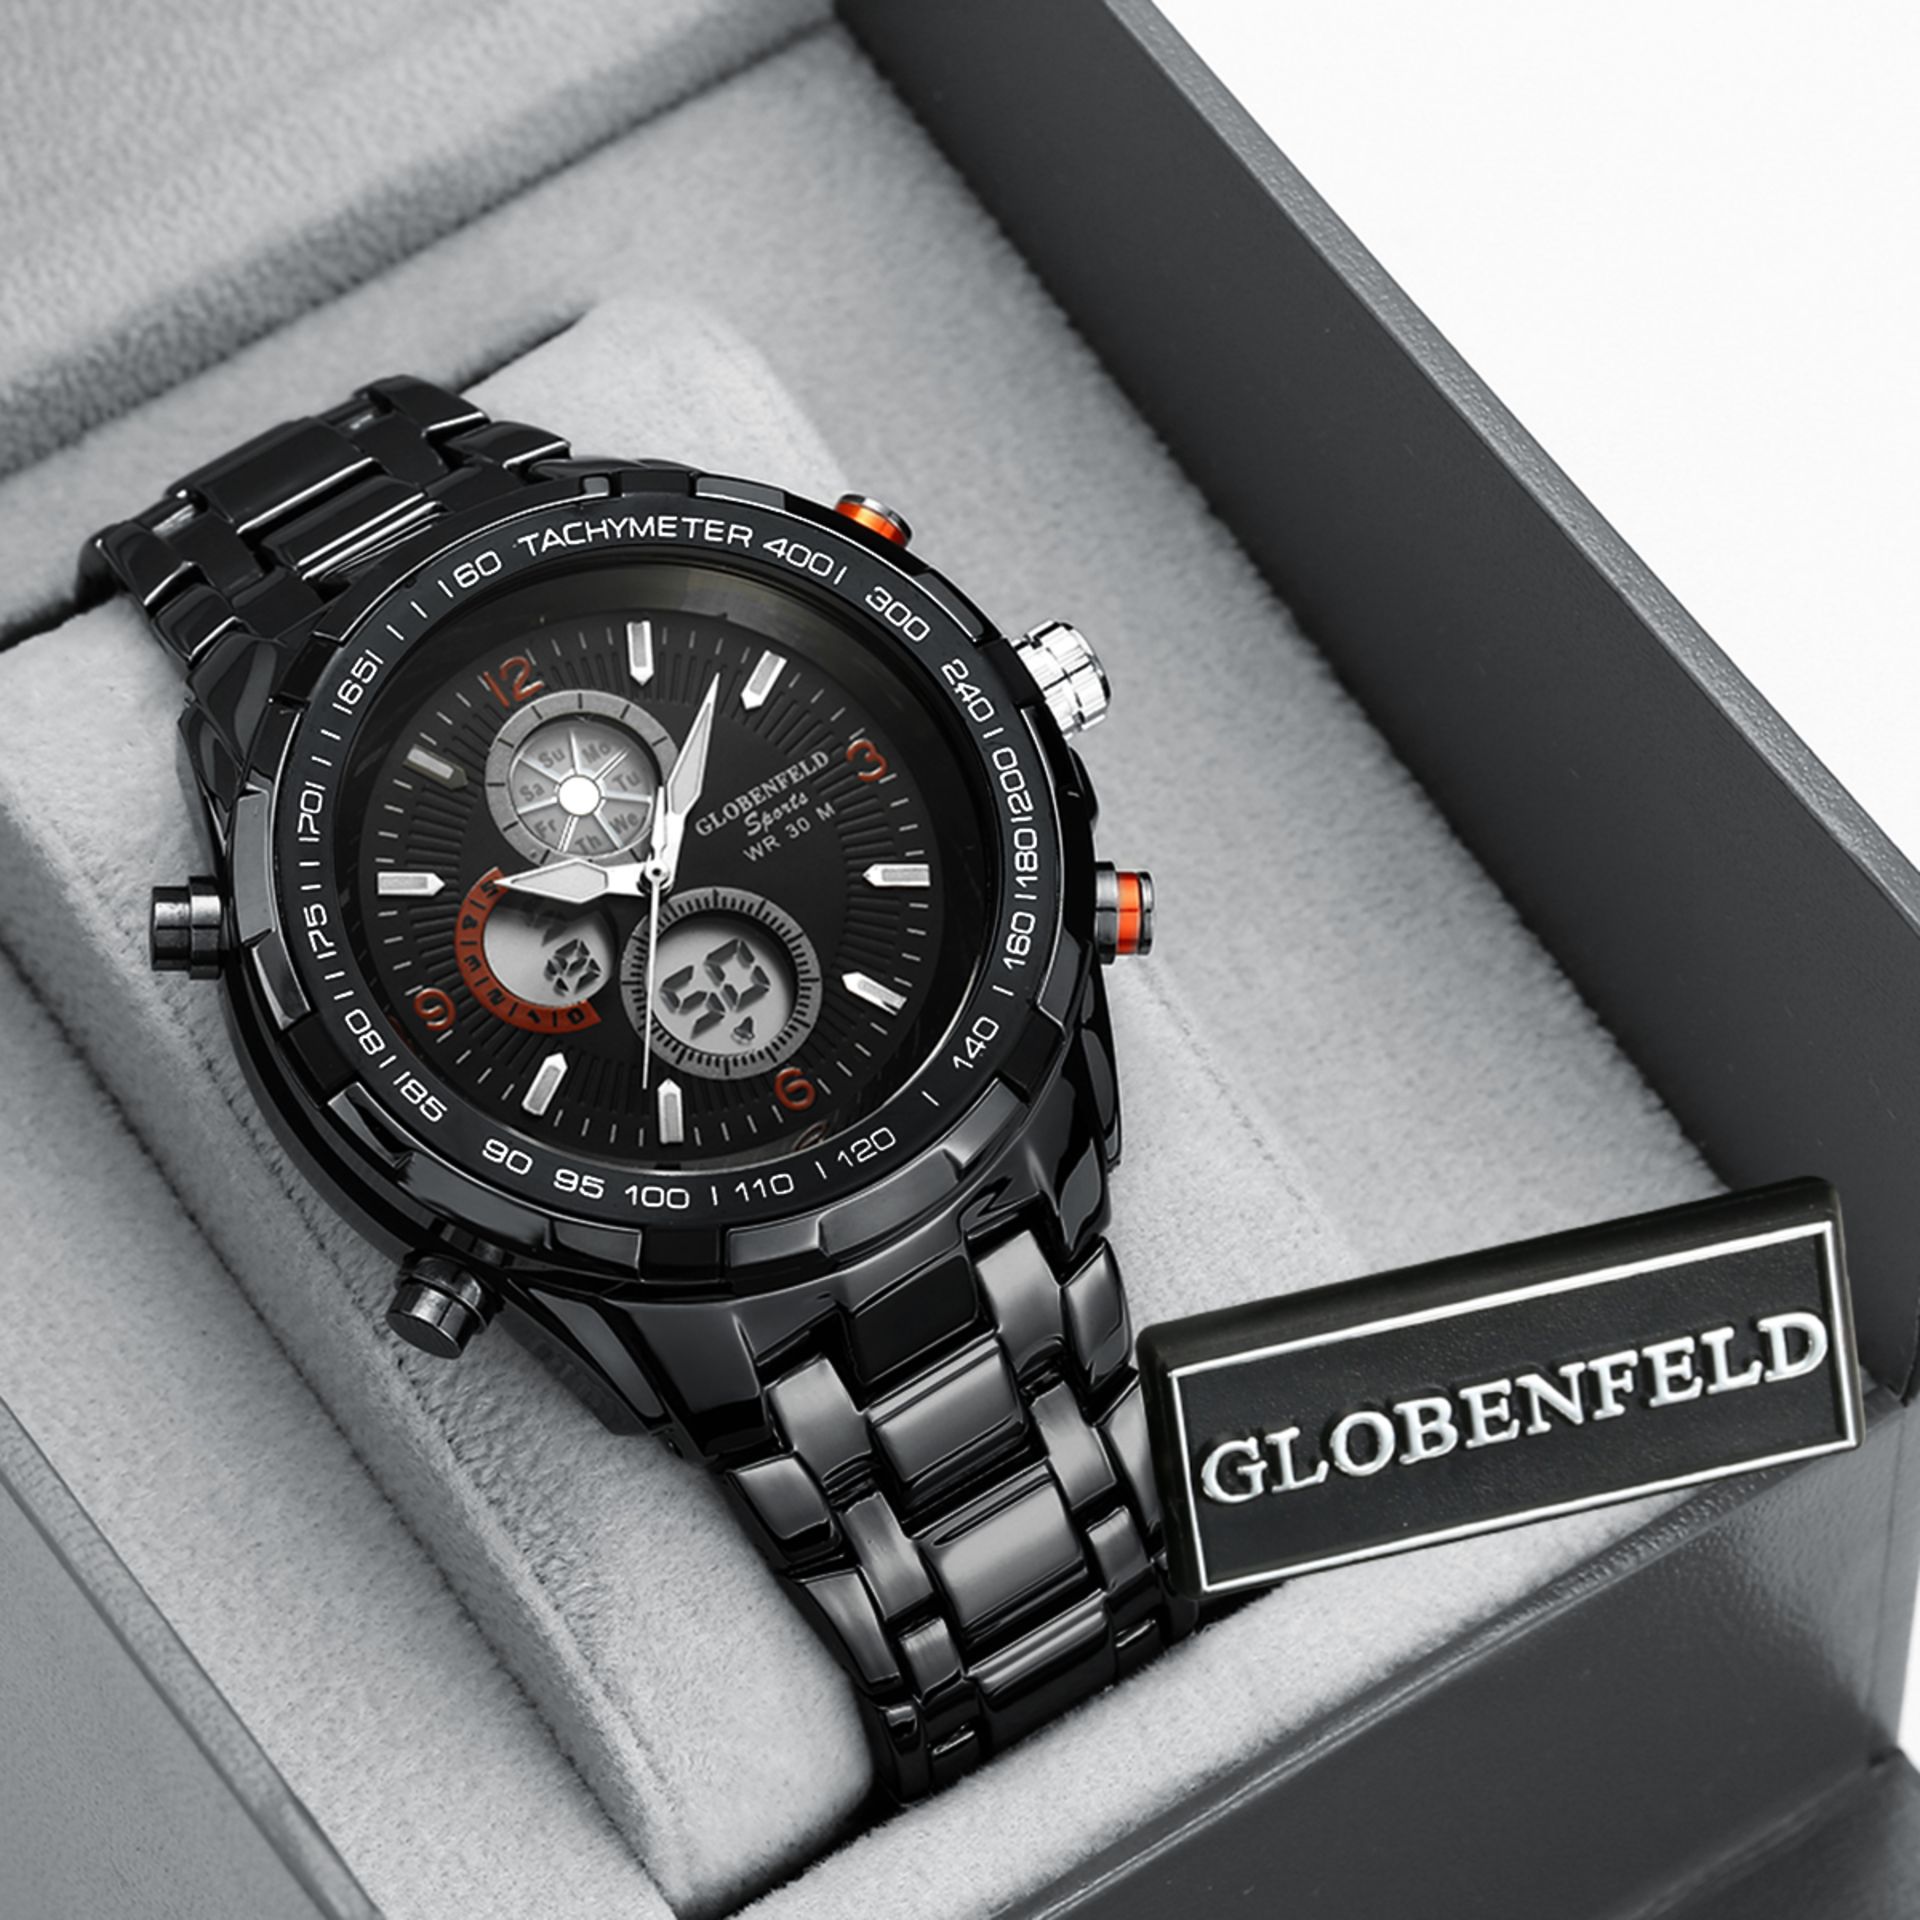 1 BRAND NEW BOXED GLOBENFELD SPORTS FACELIFT WATCH RRP £99.99 COMES WITH 5 YEAR WARRANTY SOLD